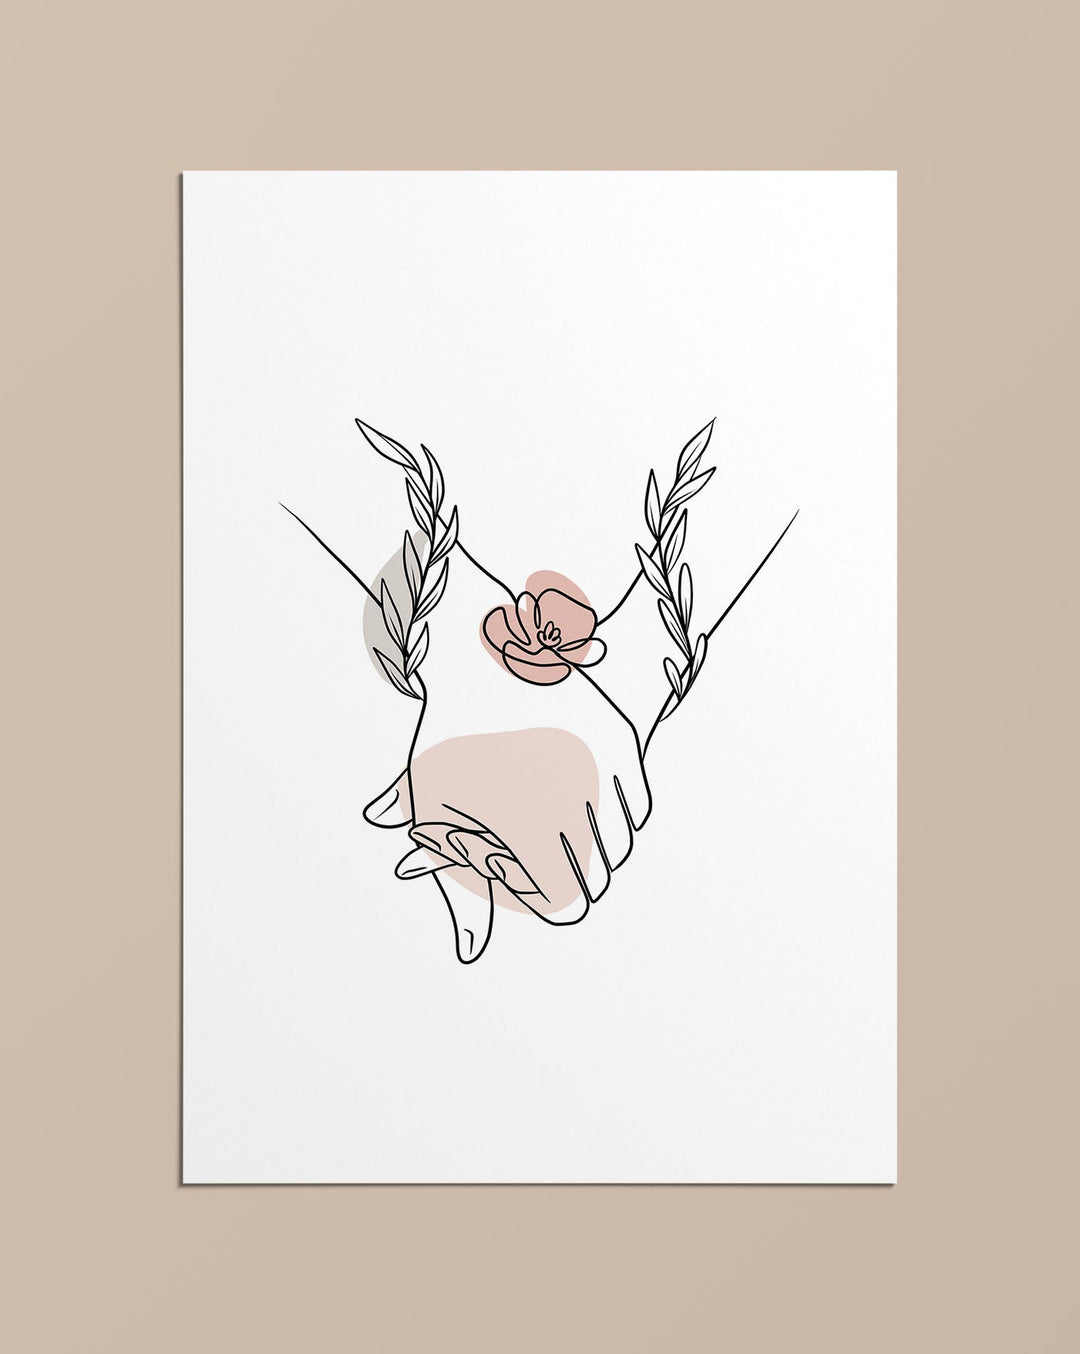 Touching Hands With Flowers - Line Art Poster - Linewand